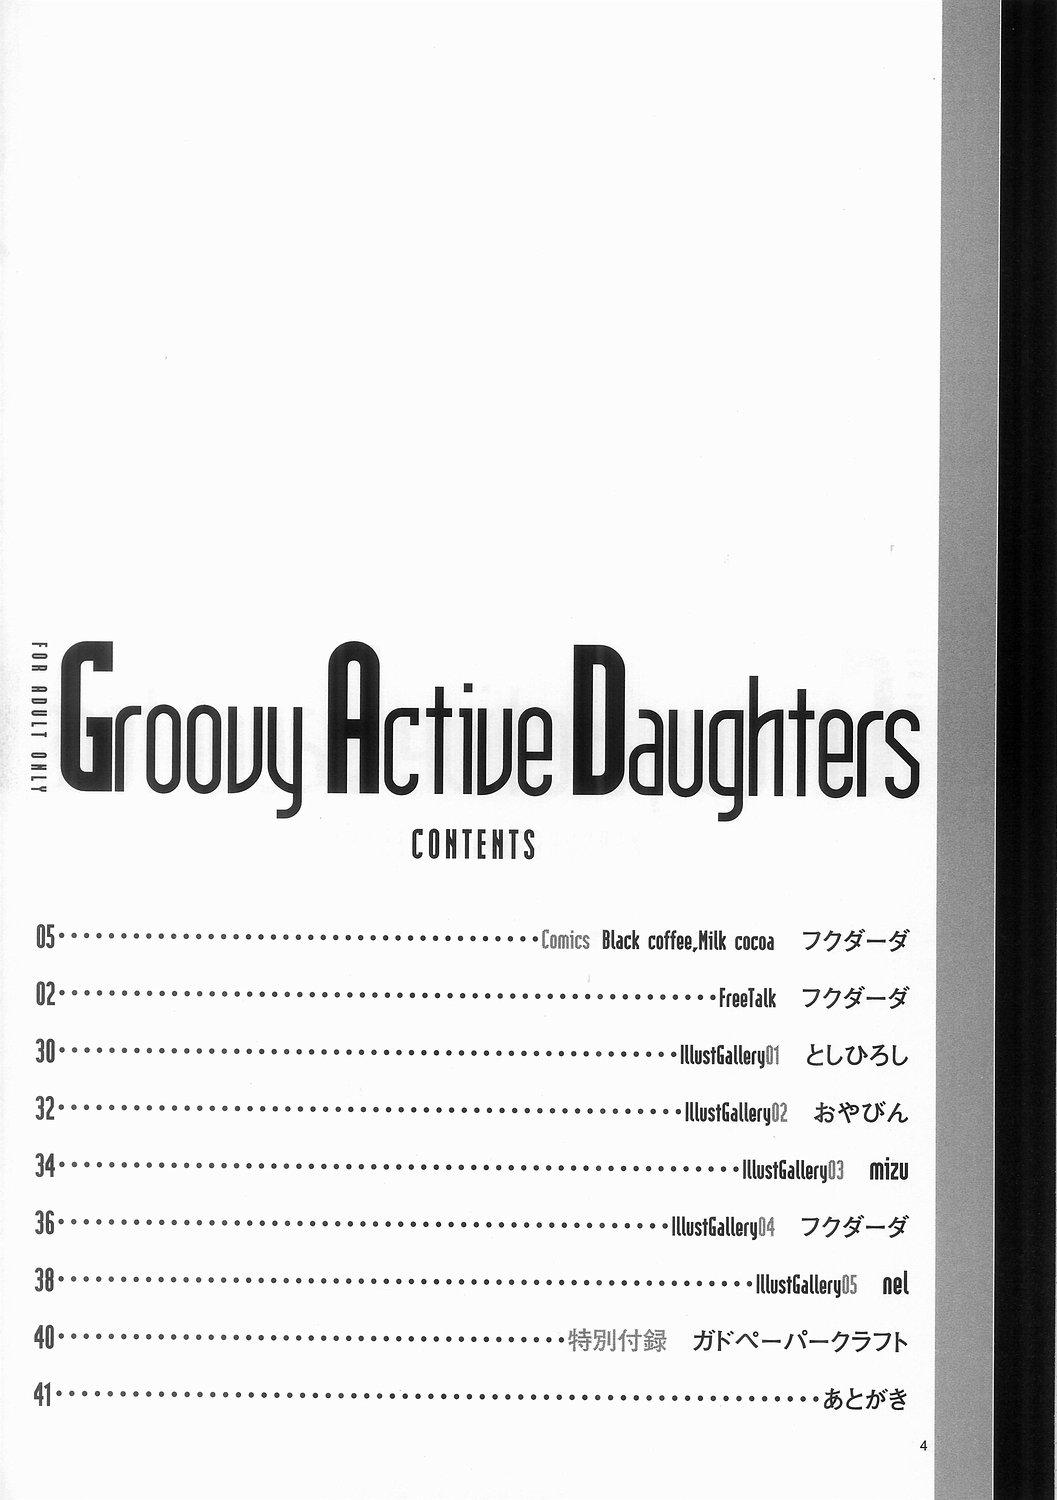 Porno Groovy Active Daughters - Gad guard Nerd - Page 4